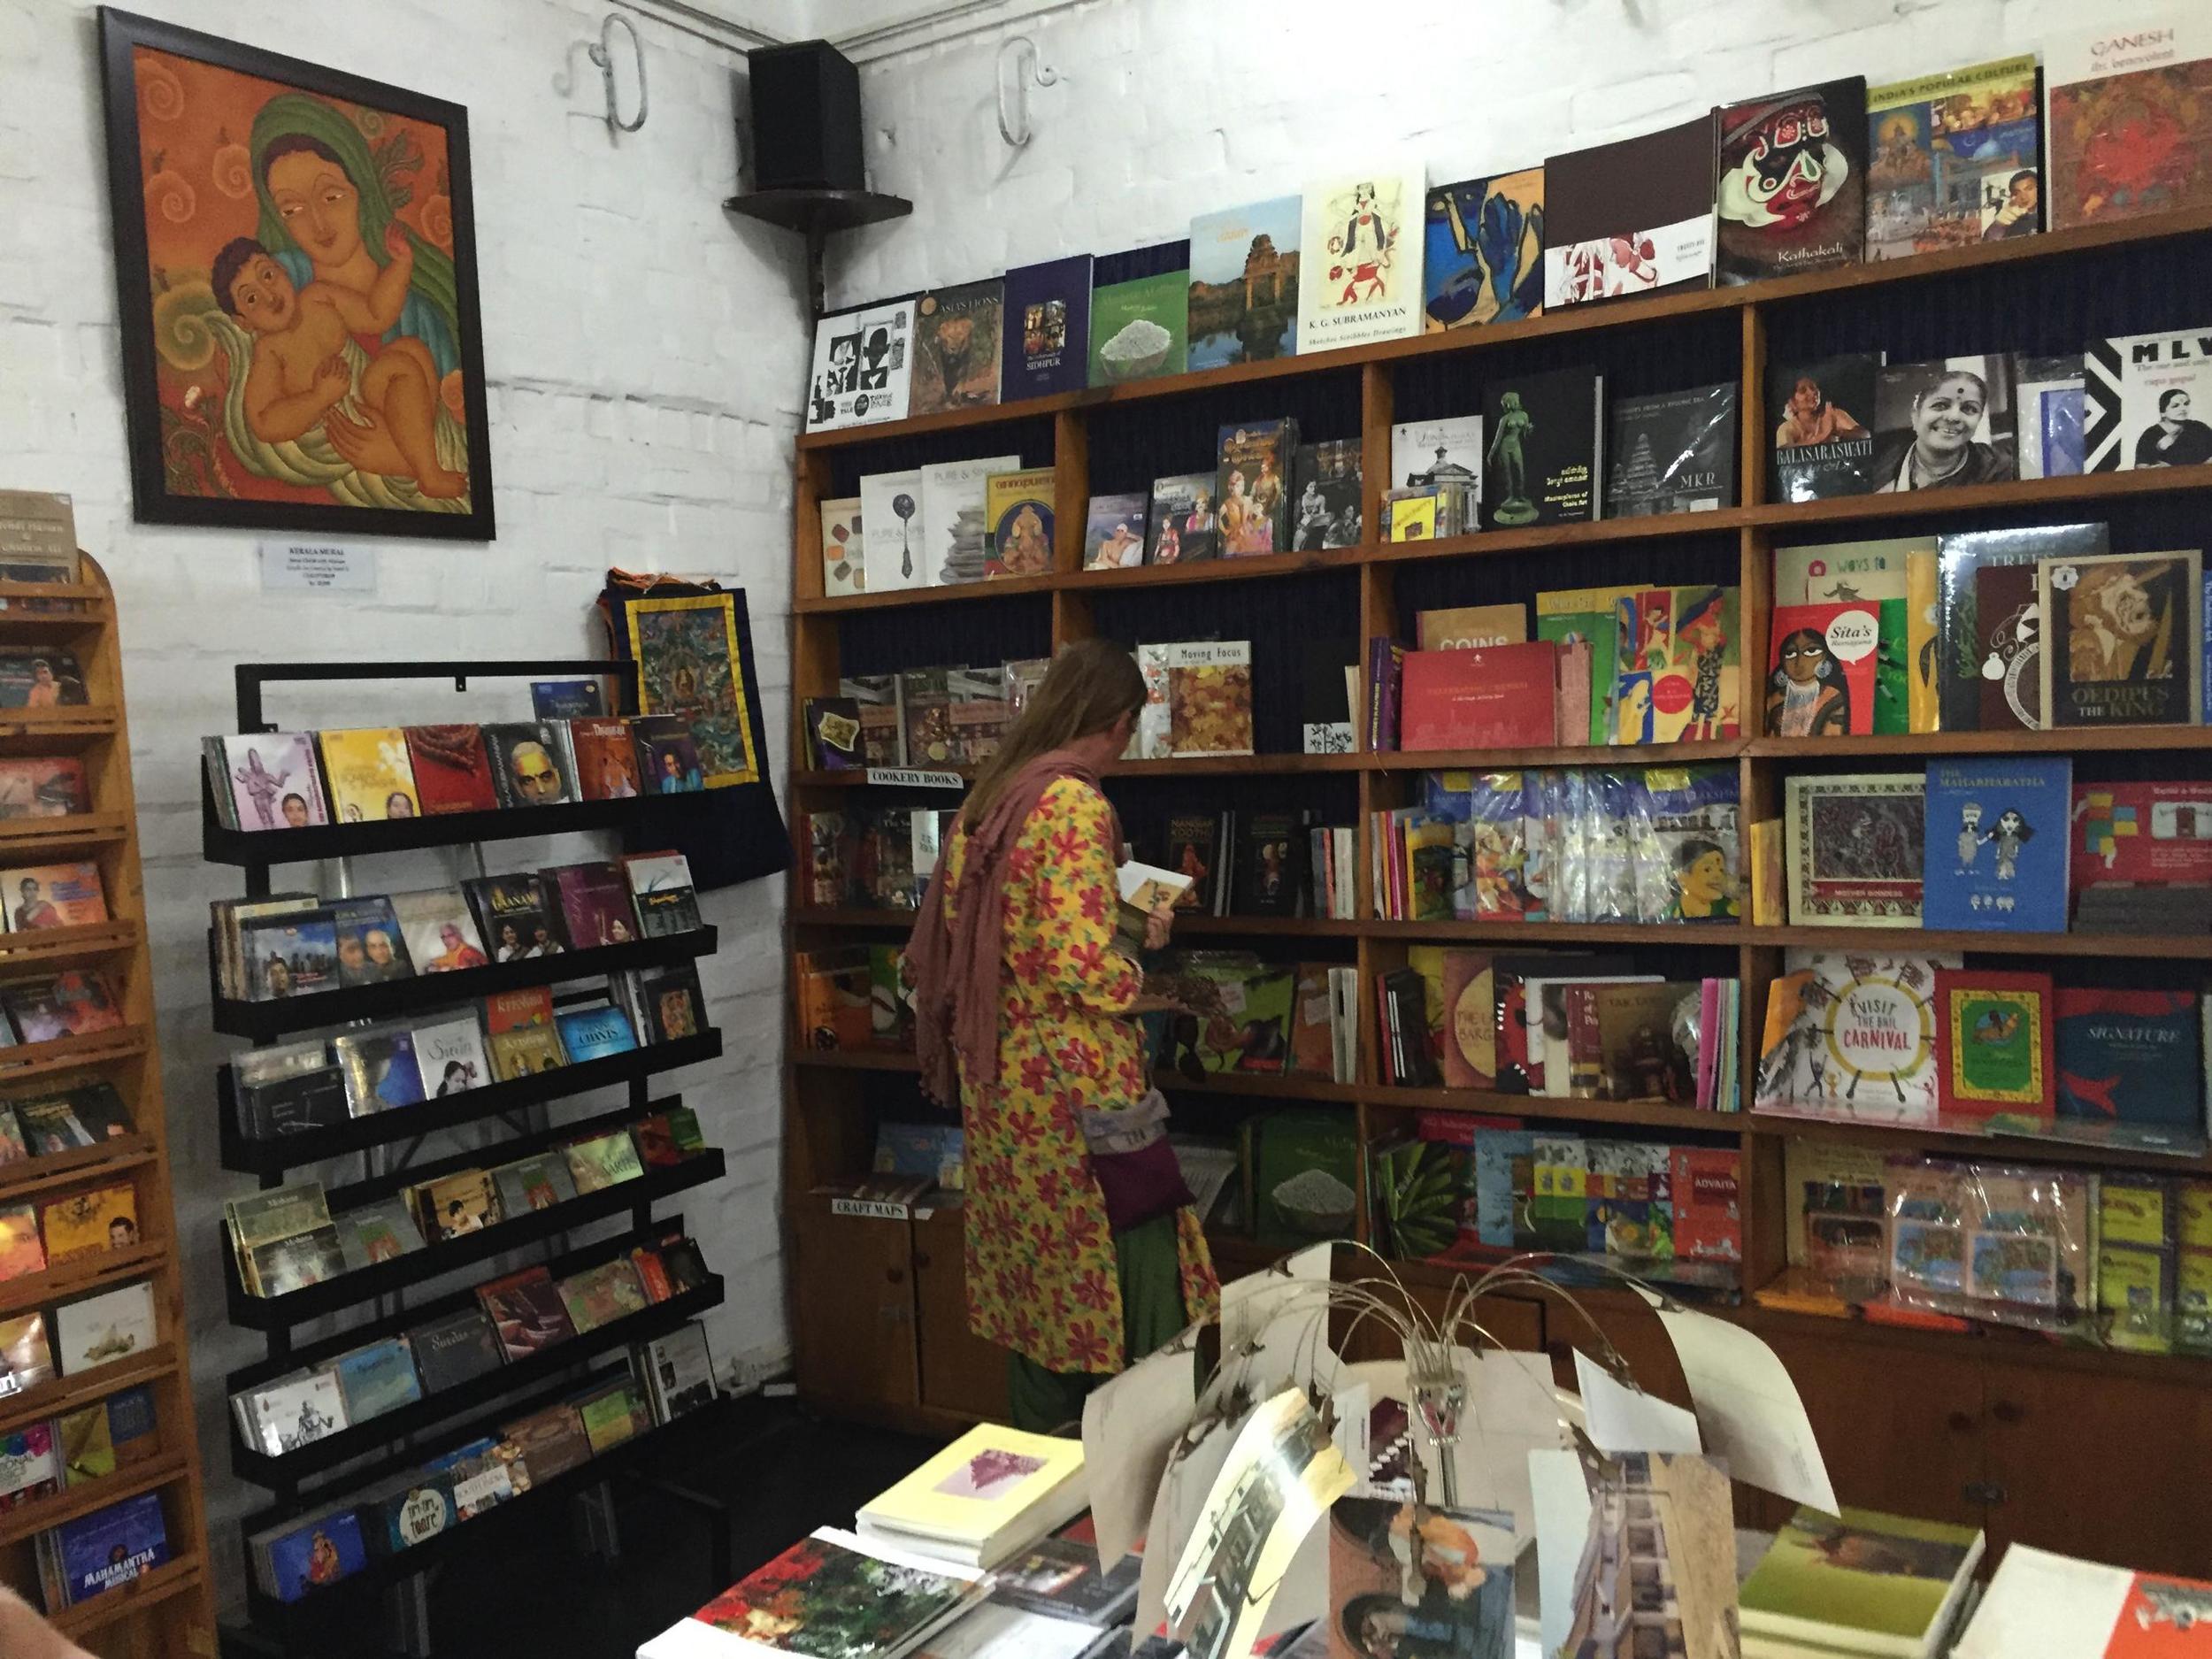 Music and books in the gift shop